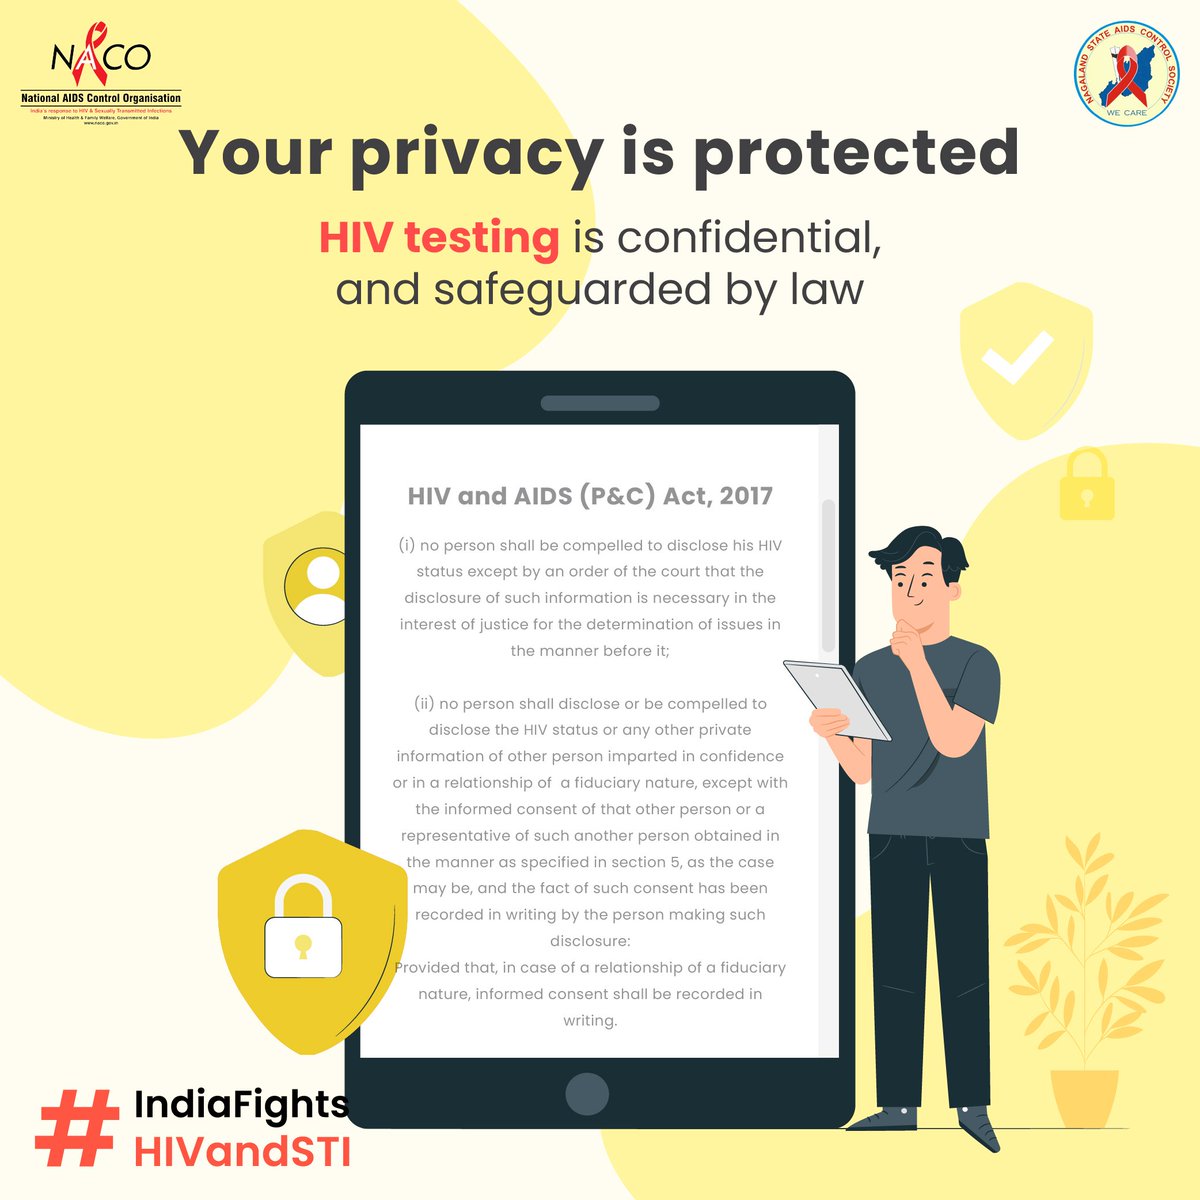 HIV testing is confidential and safeguarded by law. For more information on the HIV and AIDS (P&C) Act, 2017, visit nsacs.nagaland.gov.in.  #IndiaFightsHIVandSTI
@NACOINDIA @MyGovNagaland @HealthNagaland @dipr_nagaland